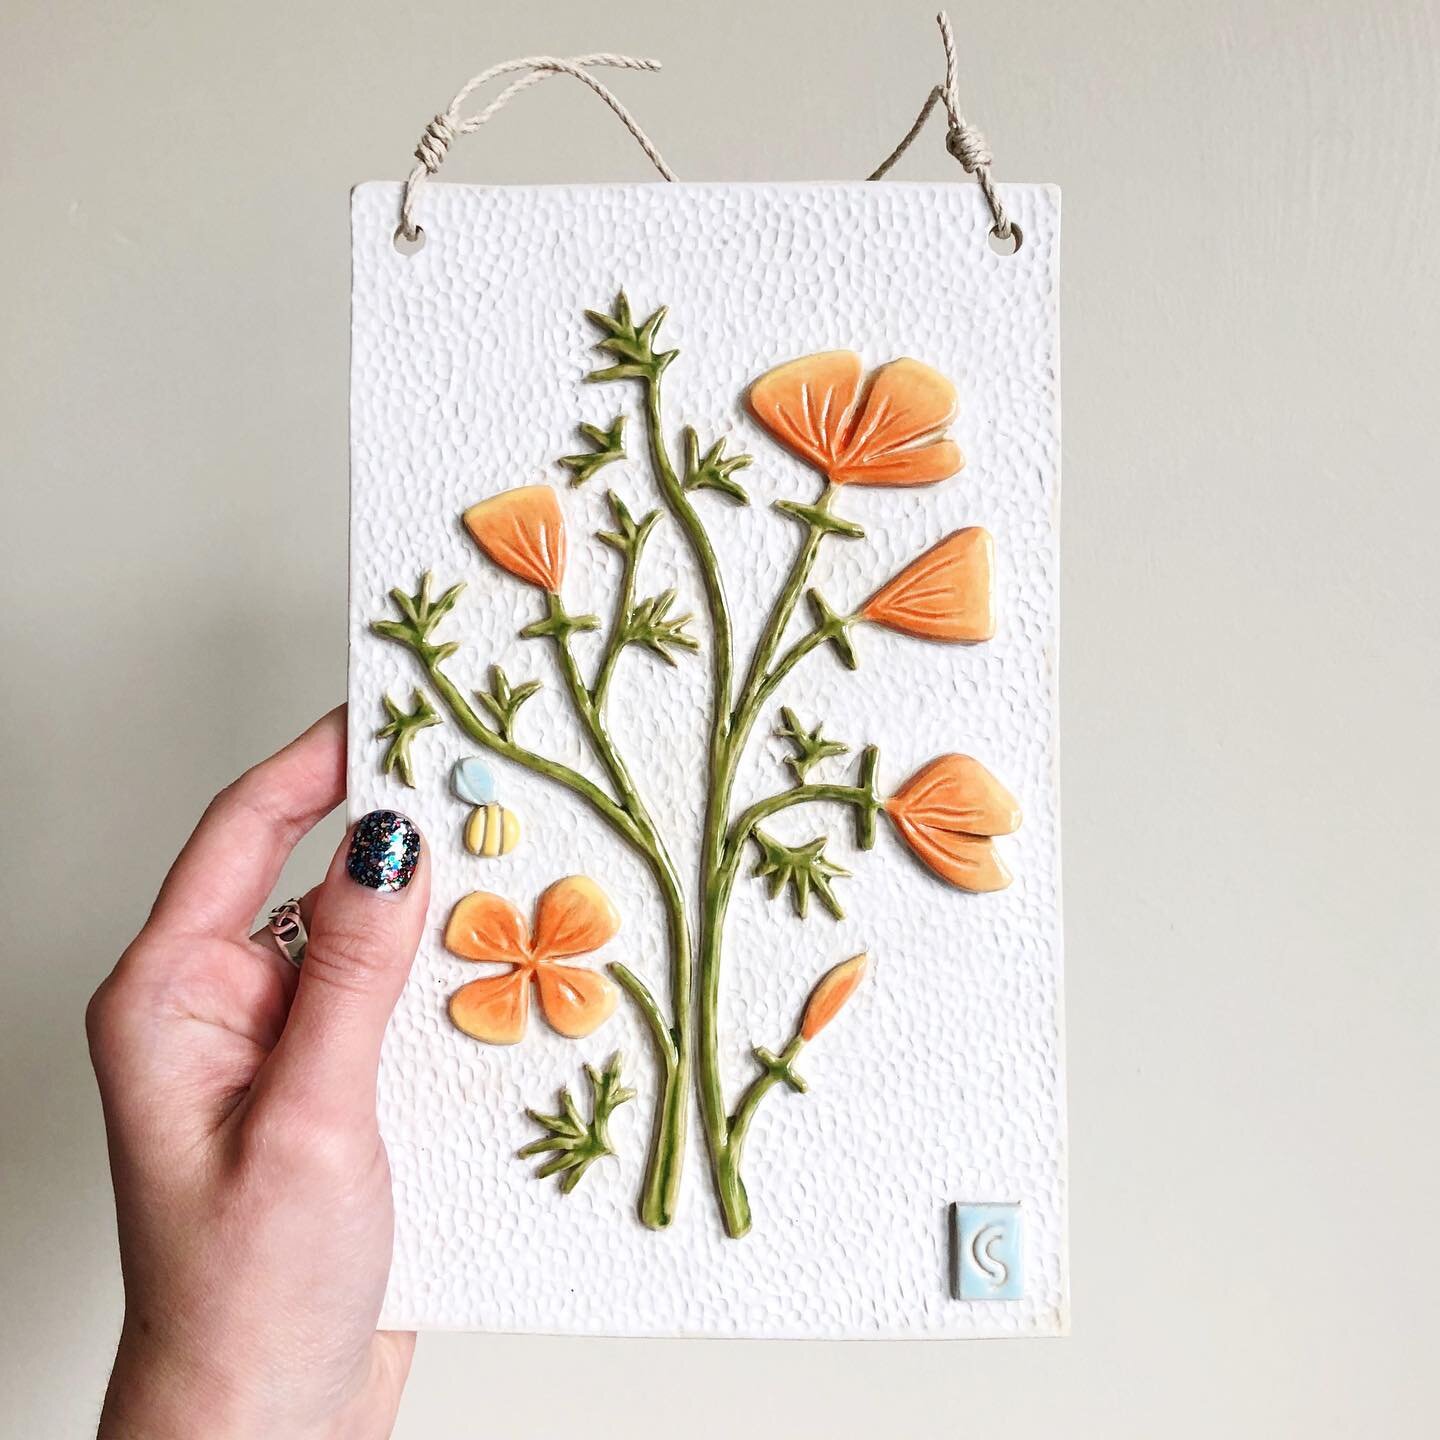 Is throwback Thursday still a thing? Here are the first poppies I ever made back in 2018! It&rsquo;s a sculptural wall panel featuring blooming California poppies &amp; a little 🐝. Swipe through to see a pic of me painting it in the community studio